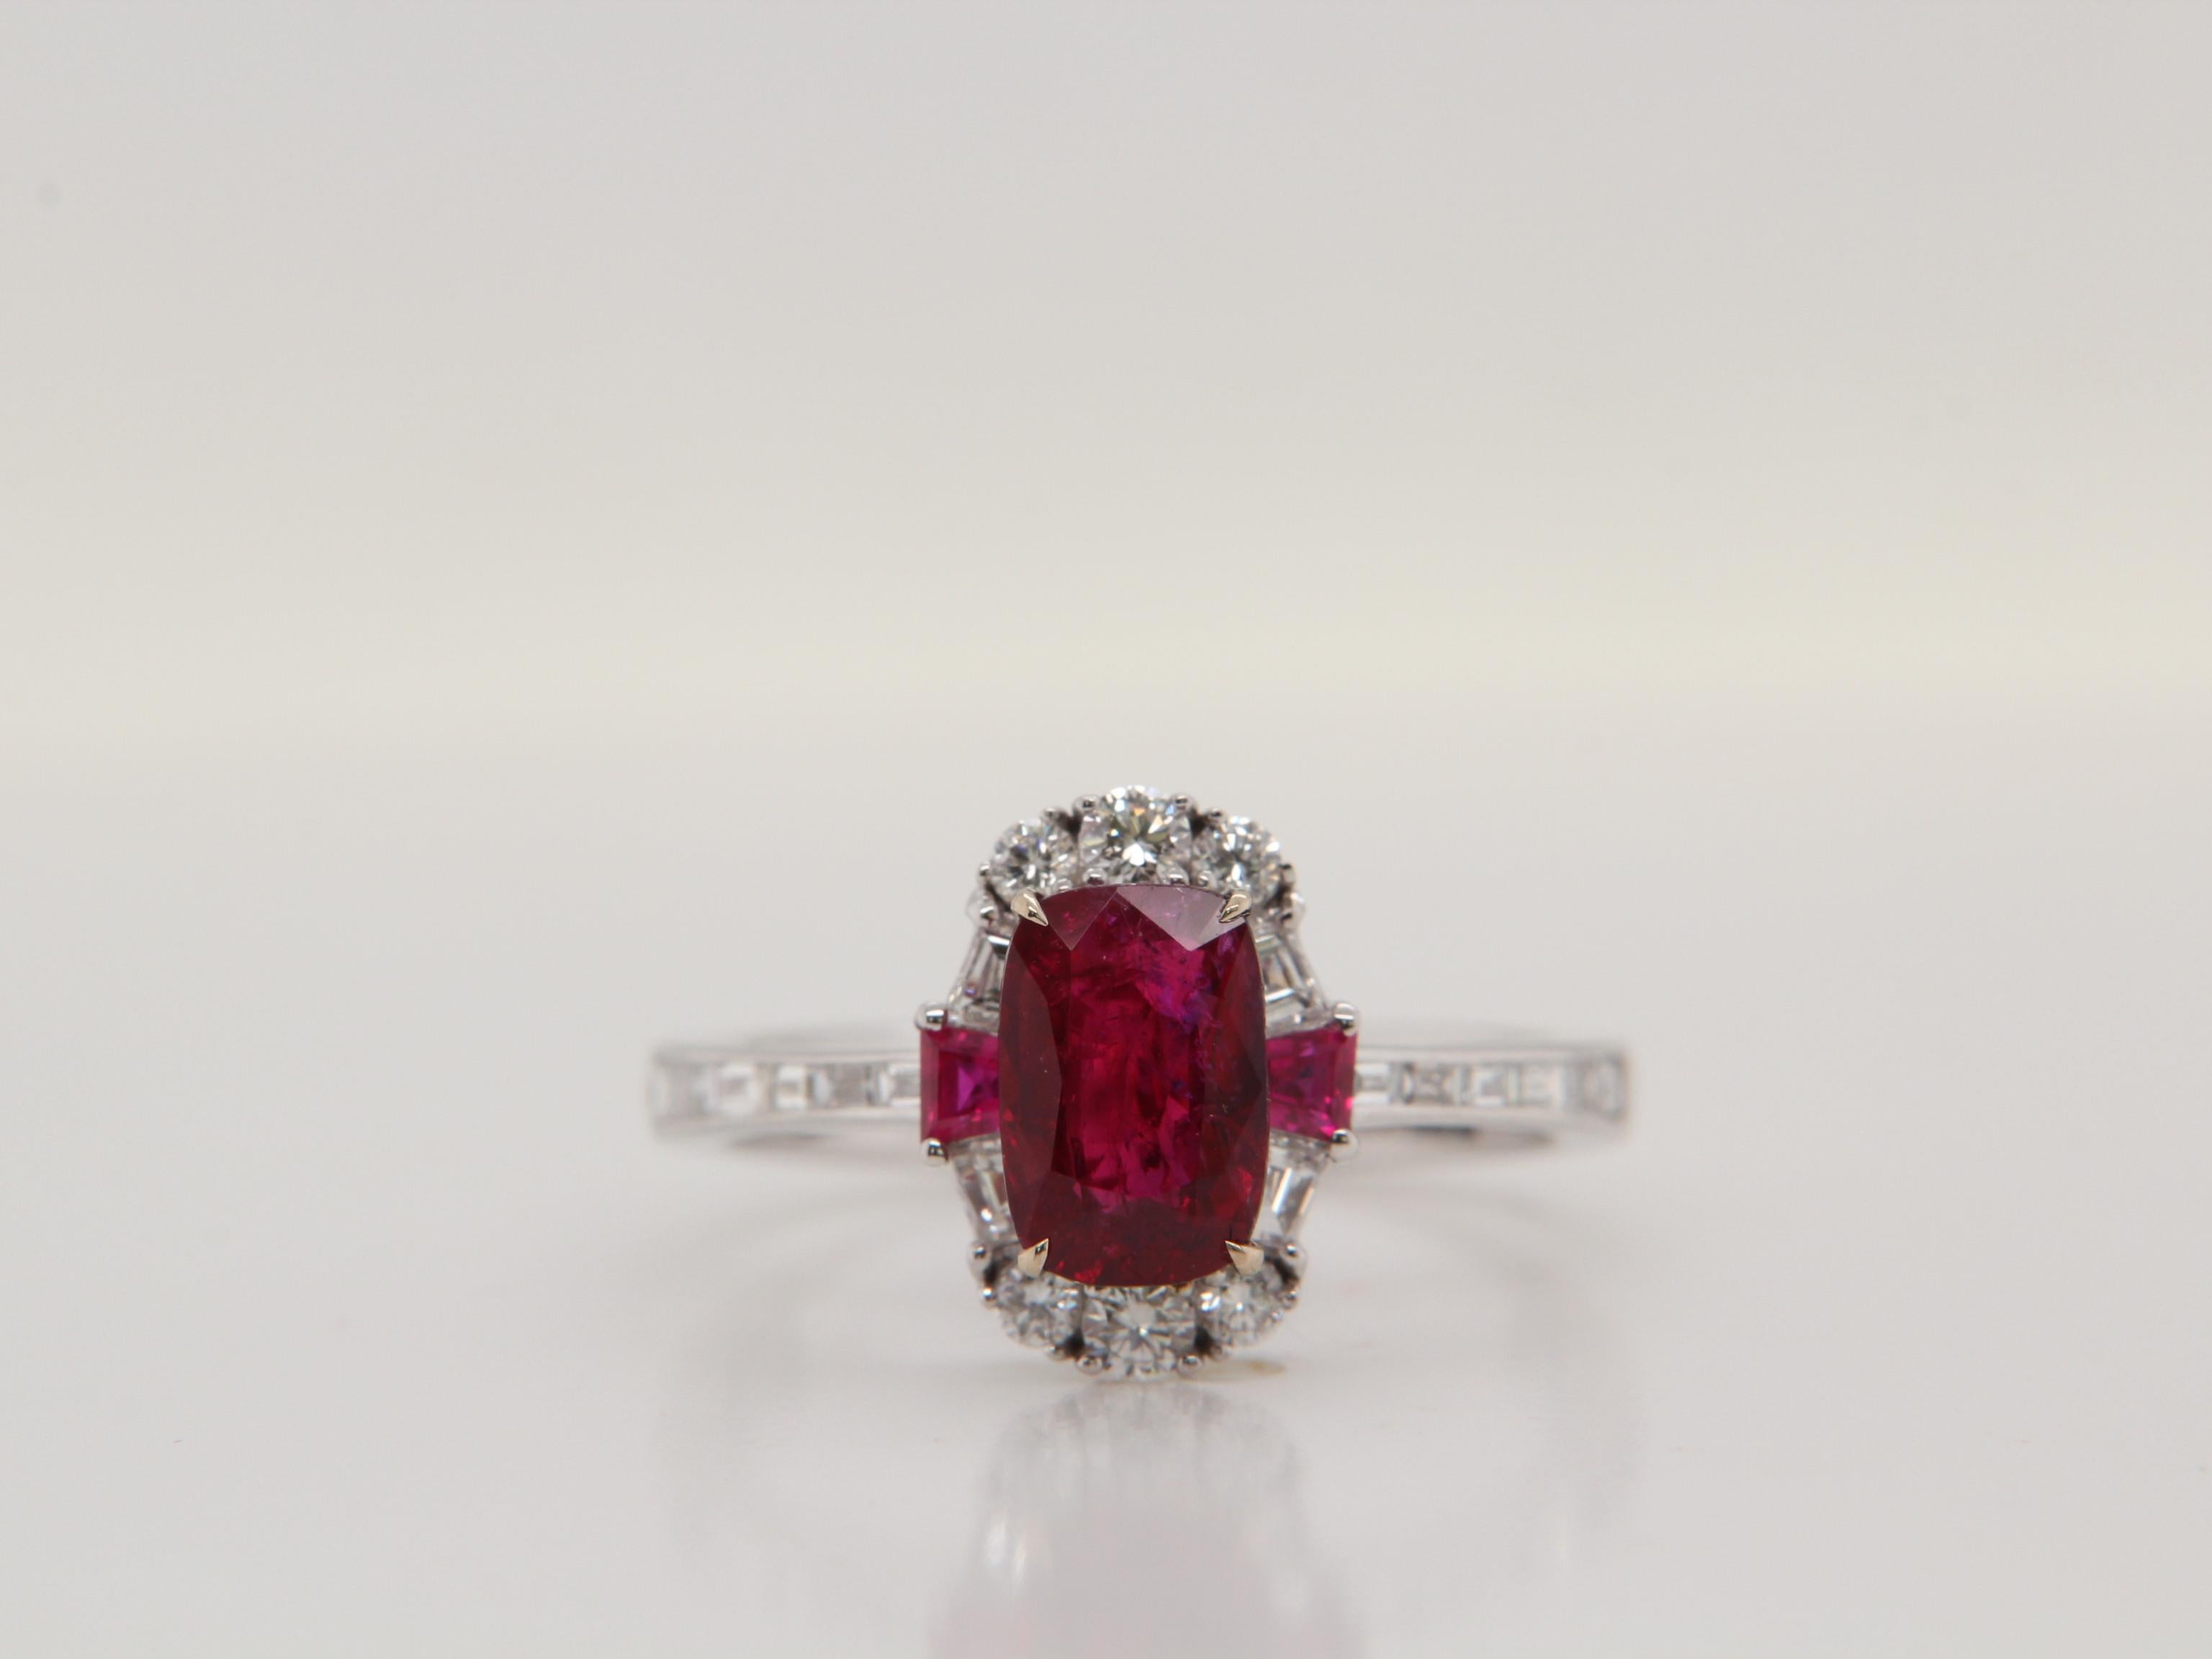 A brand new ruby and diamond ring made with 18K gold. Following a classic design, the ring has a rare vivid red Burmese ruby that helps the wearer feel important. The ruby weighs 1.56ct and is certified by Gem Research Swisslab (GRS) as natural, no